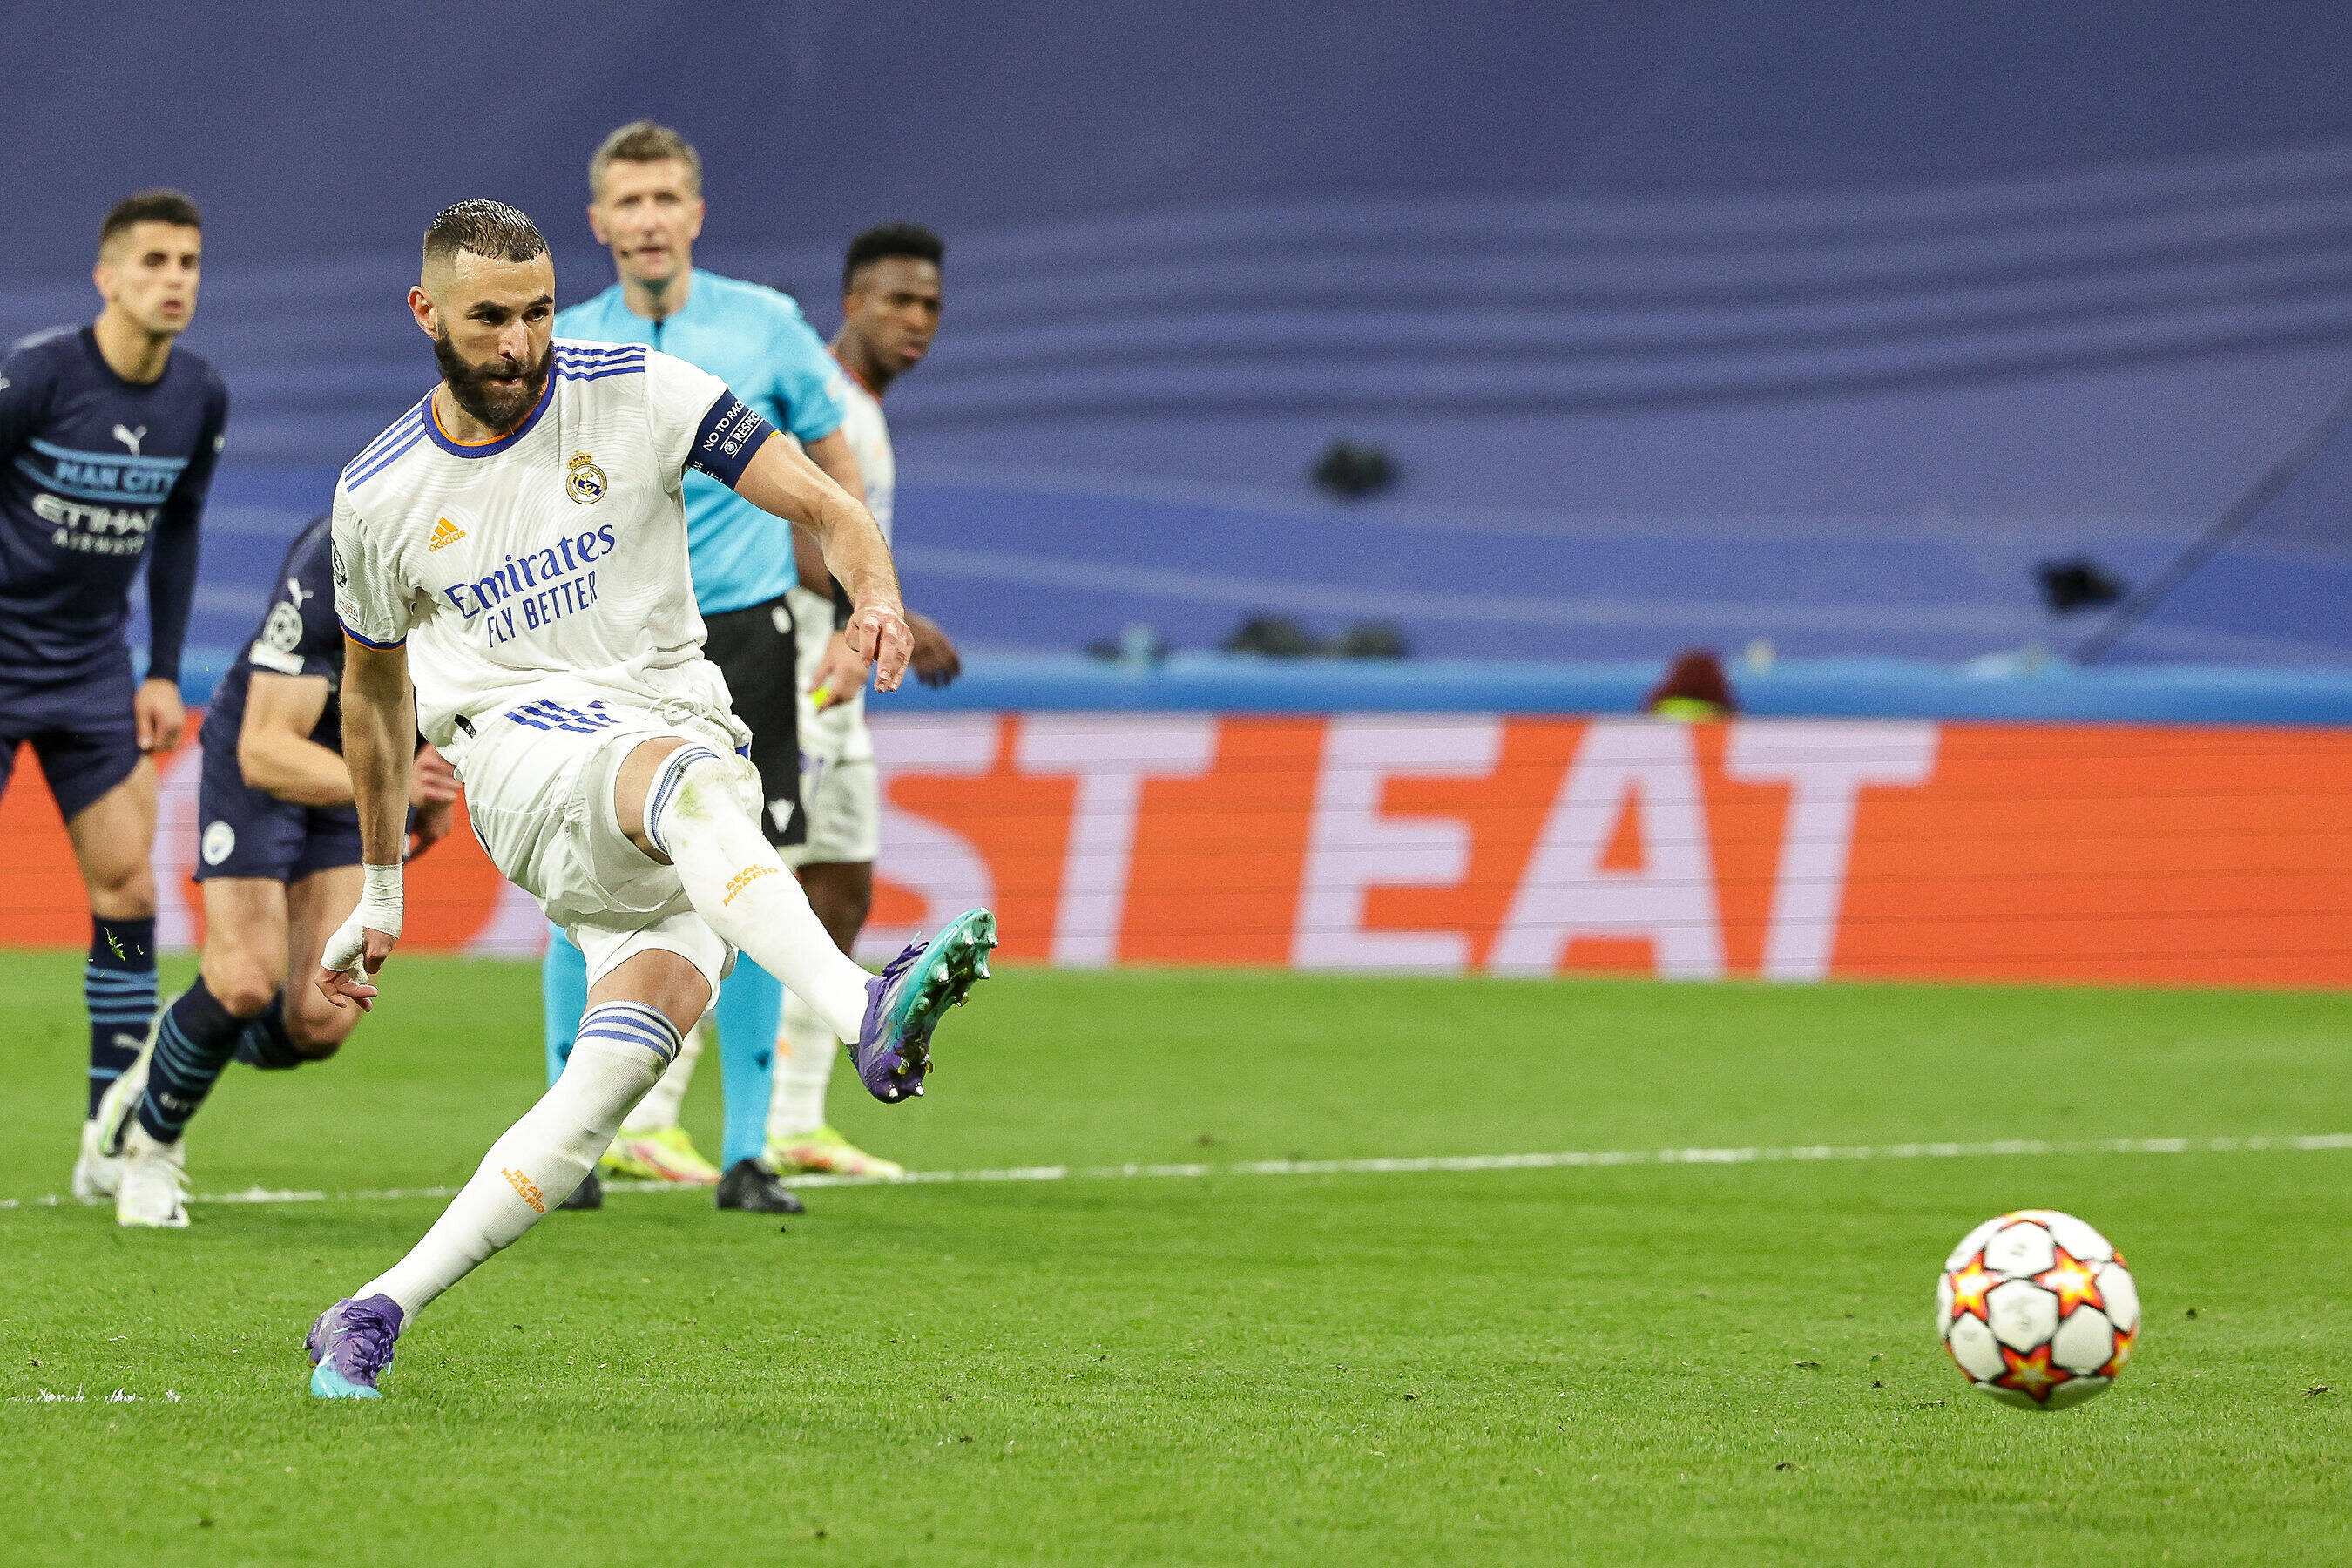 Karim Benzema sealed a place in the final for Real Madrid 